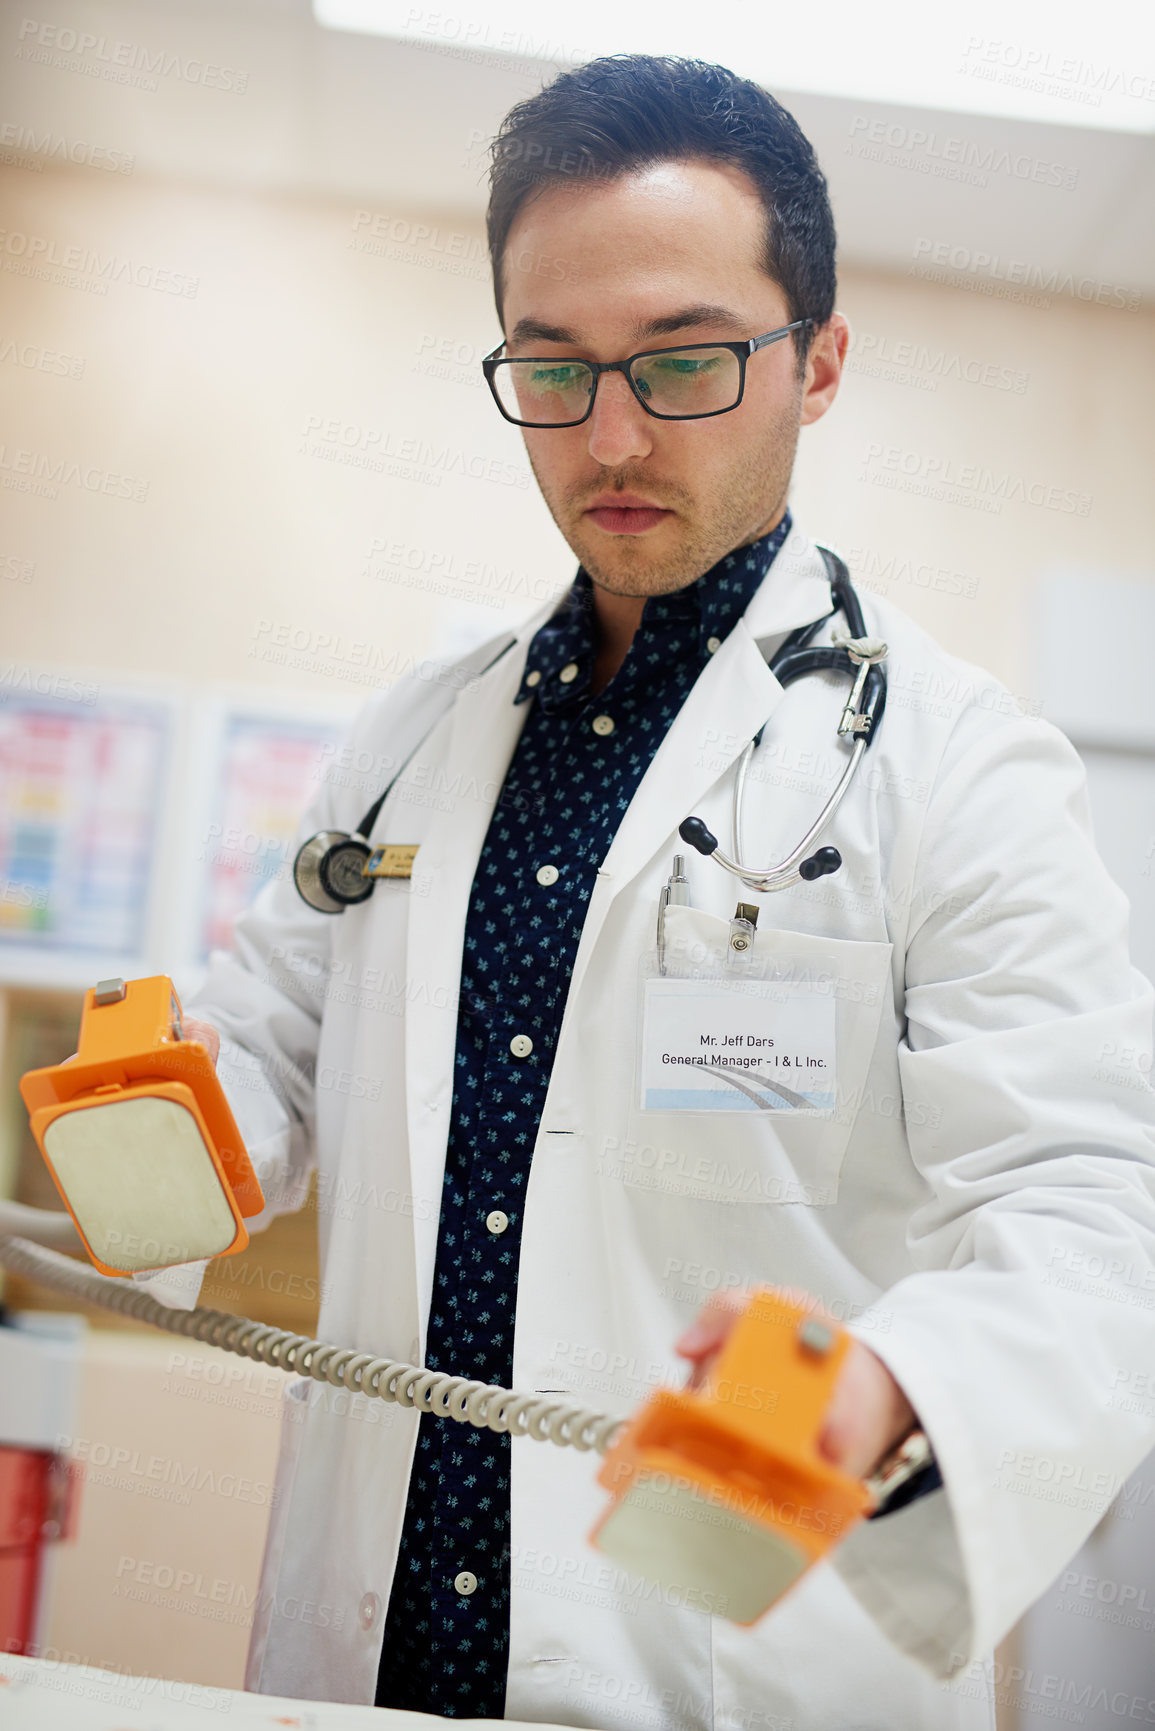 Buy stock photo Shot of a doctor using a defibrillator in a hospital